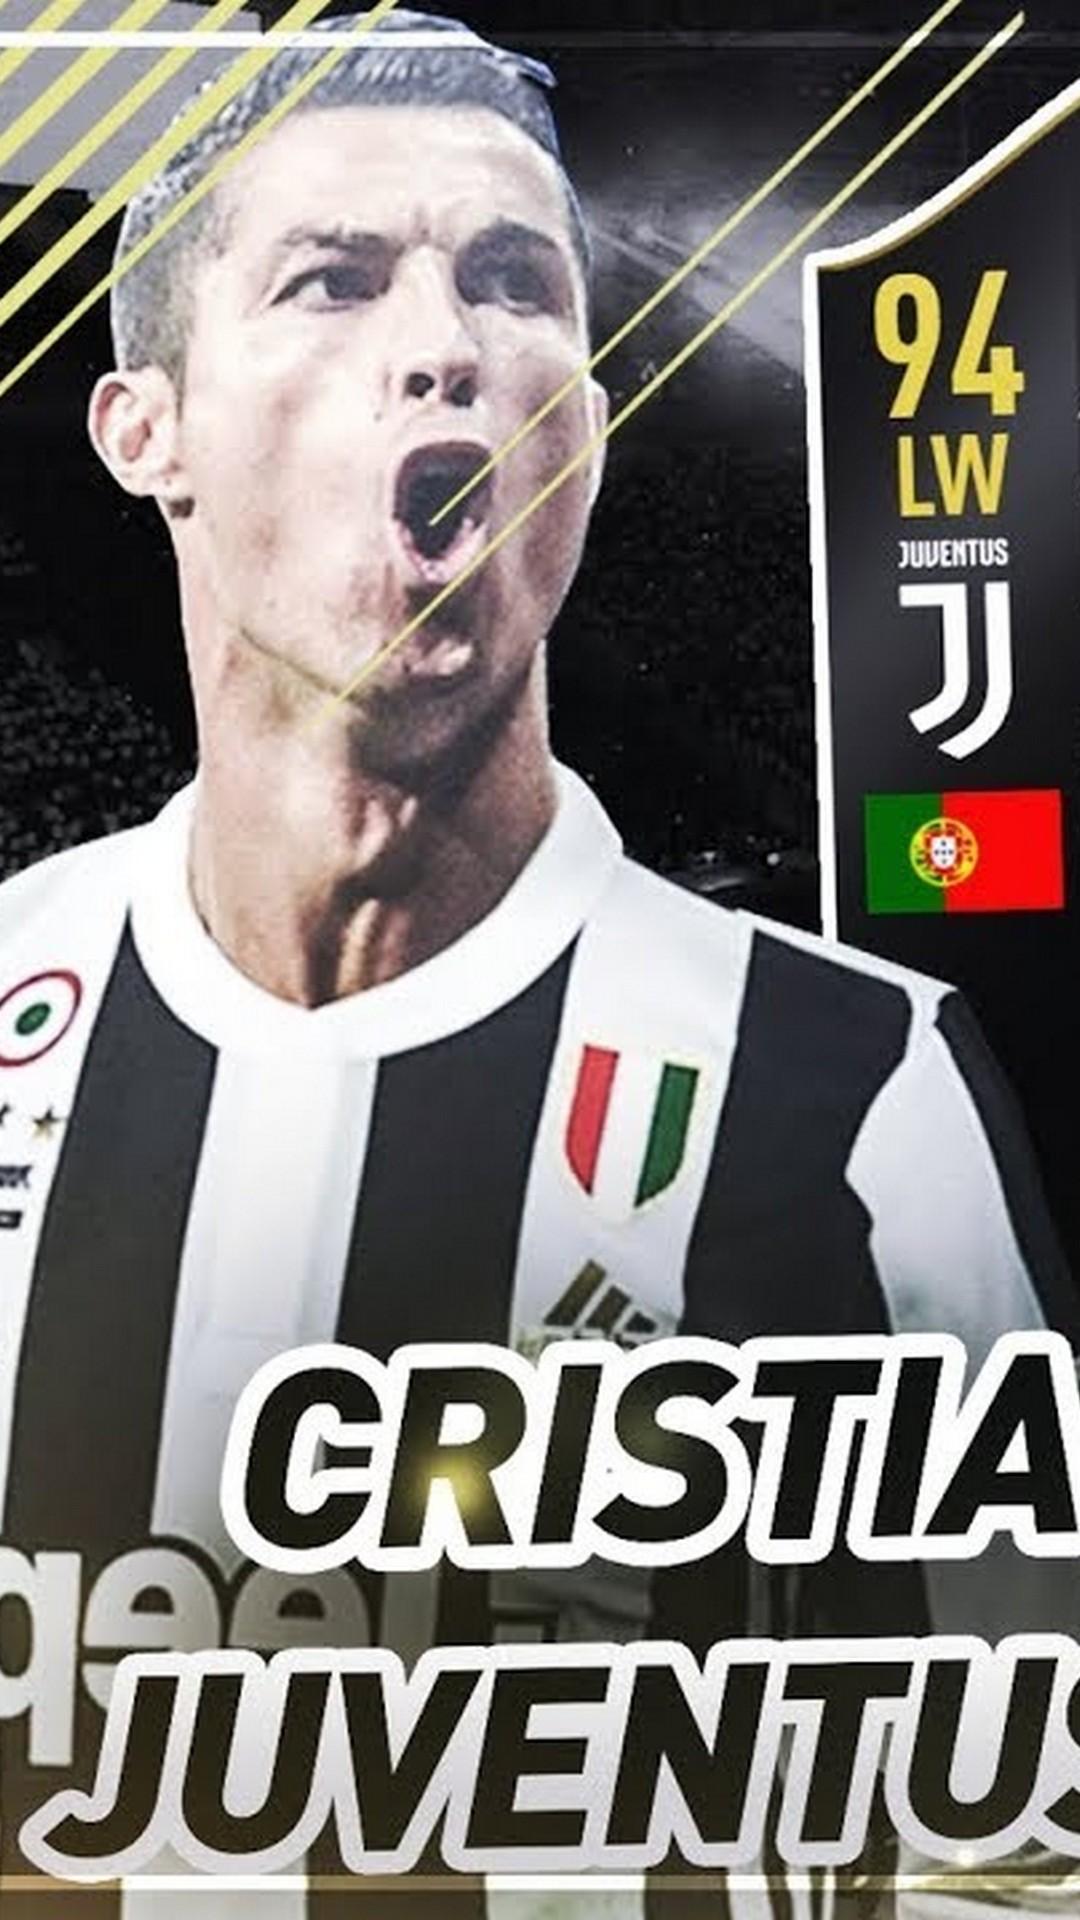 Cristiano Ronaldo Juventus Wallpaper For Android Android